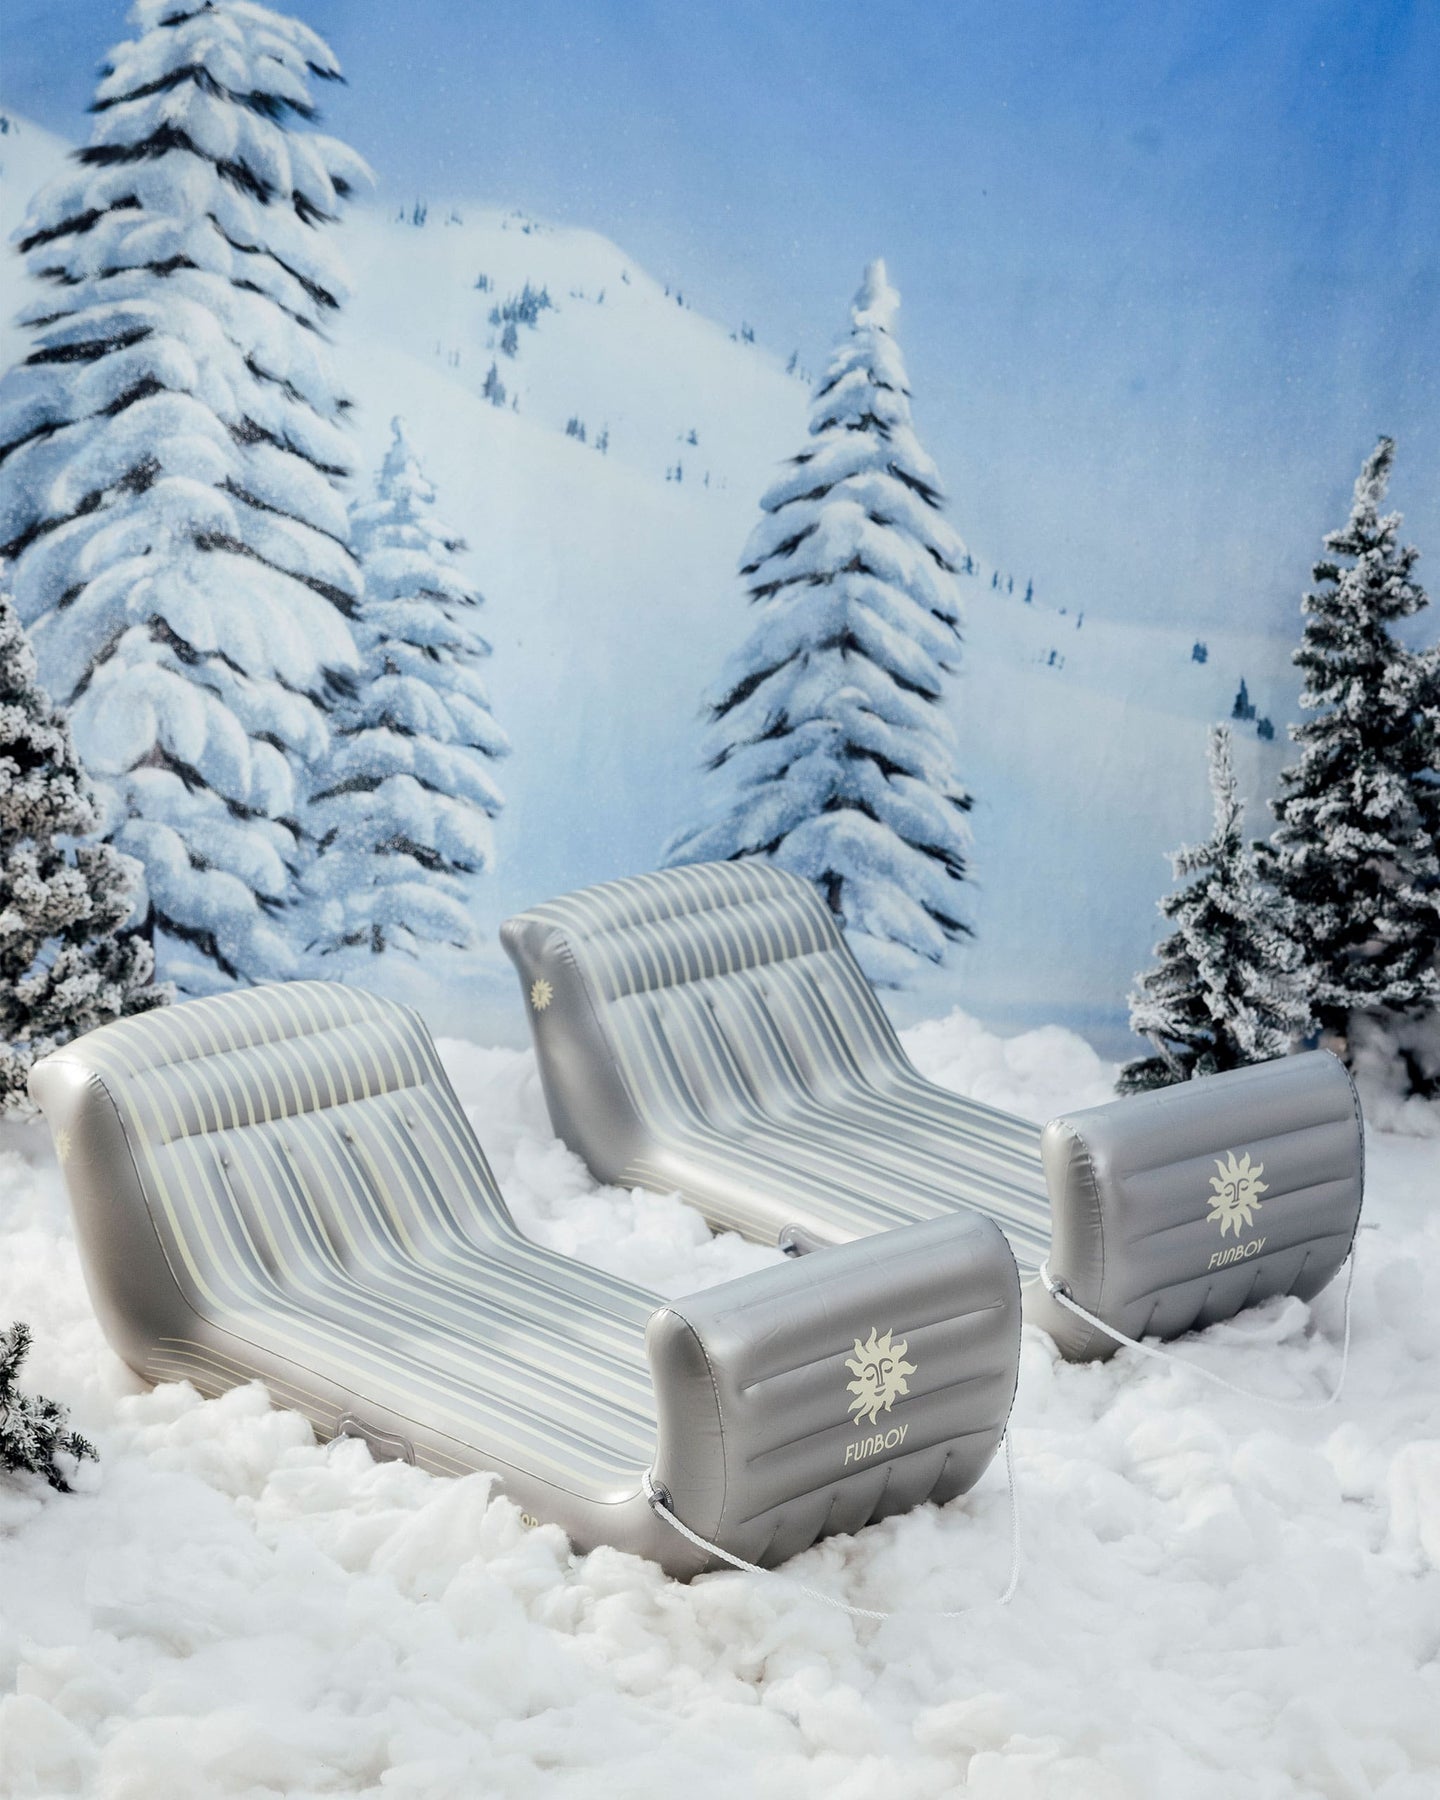 FUNBOY Metallic Silver Sleigh Sled - buy two and save